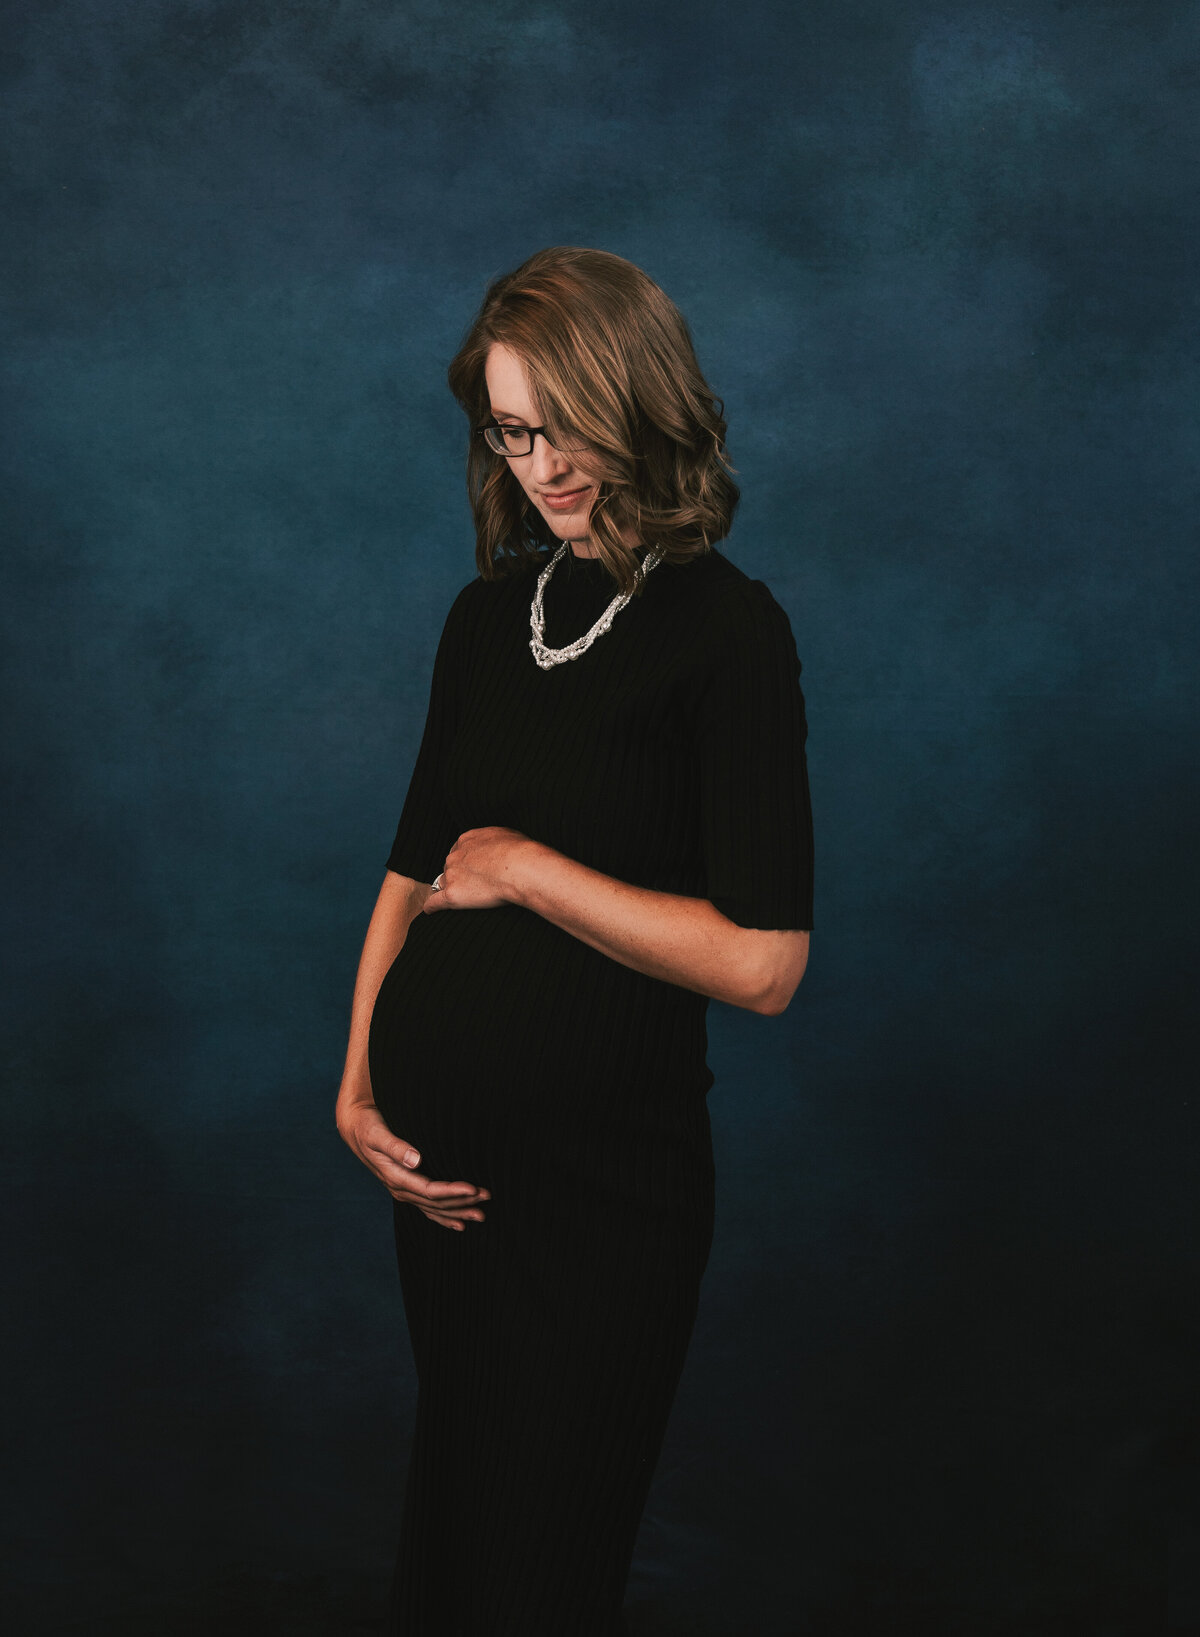 Expectant mother on a blue backdrop in a studio maternity photo.